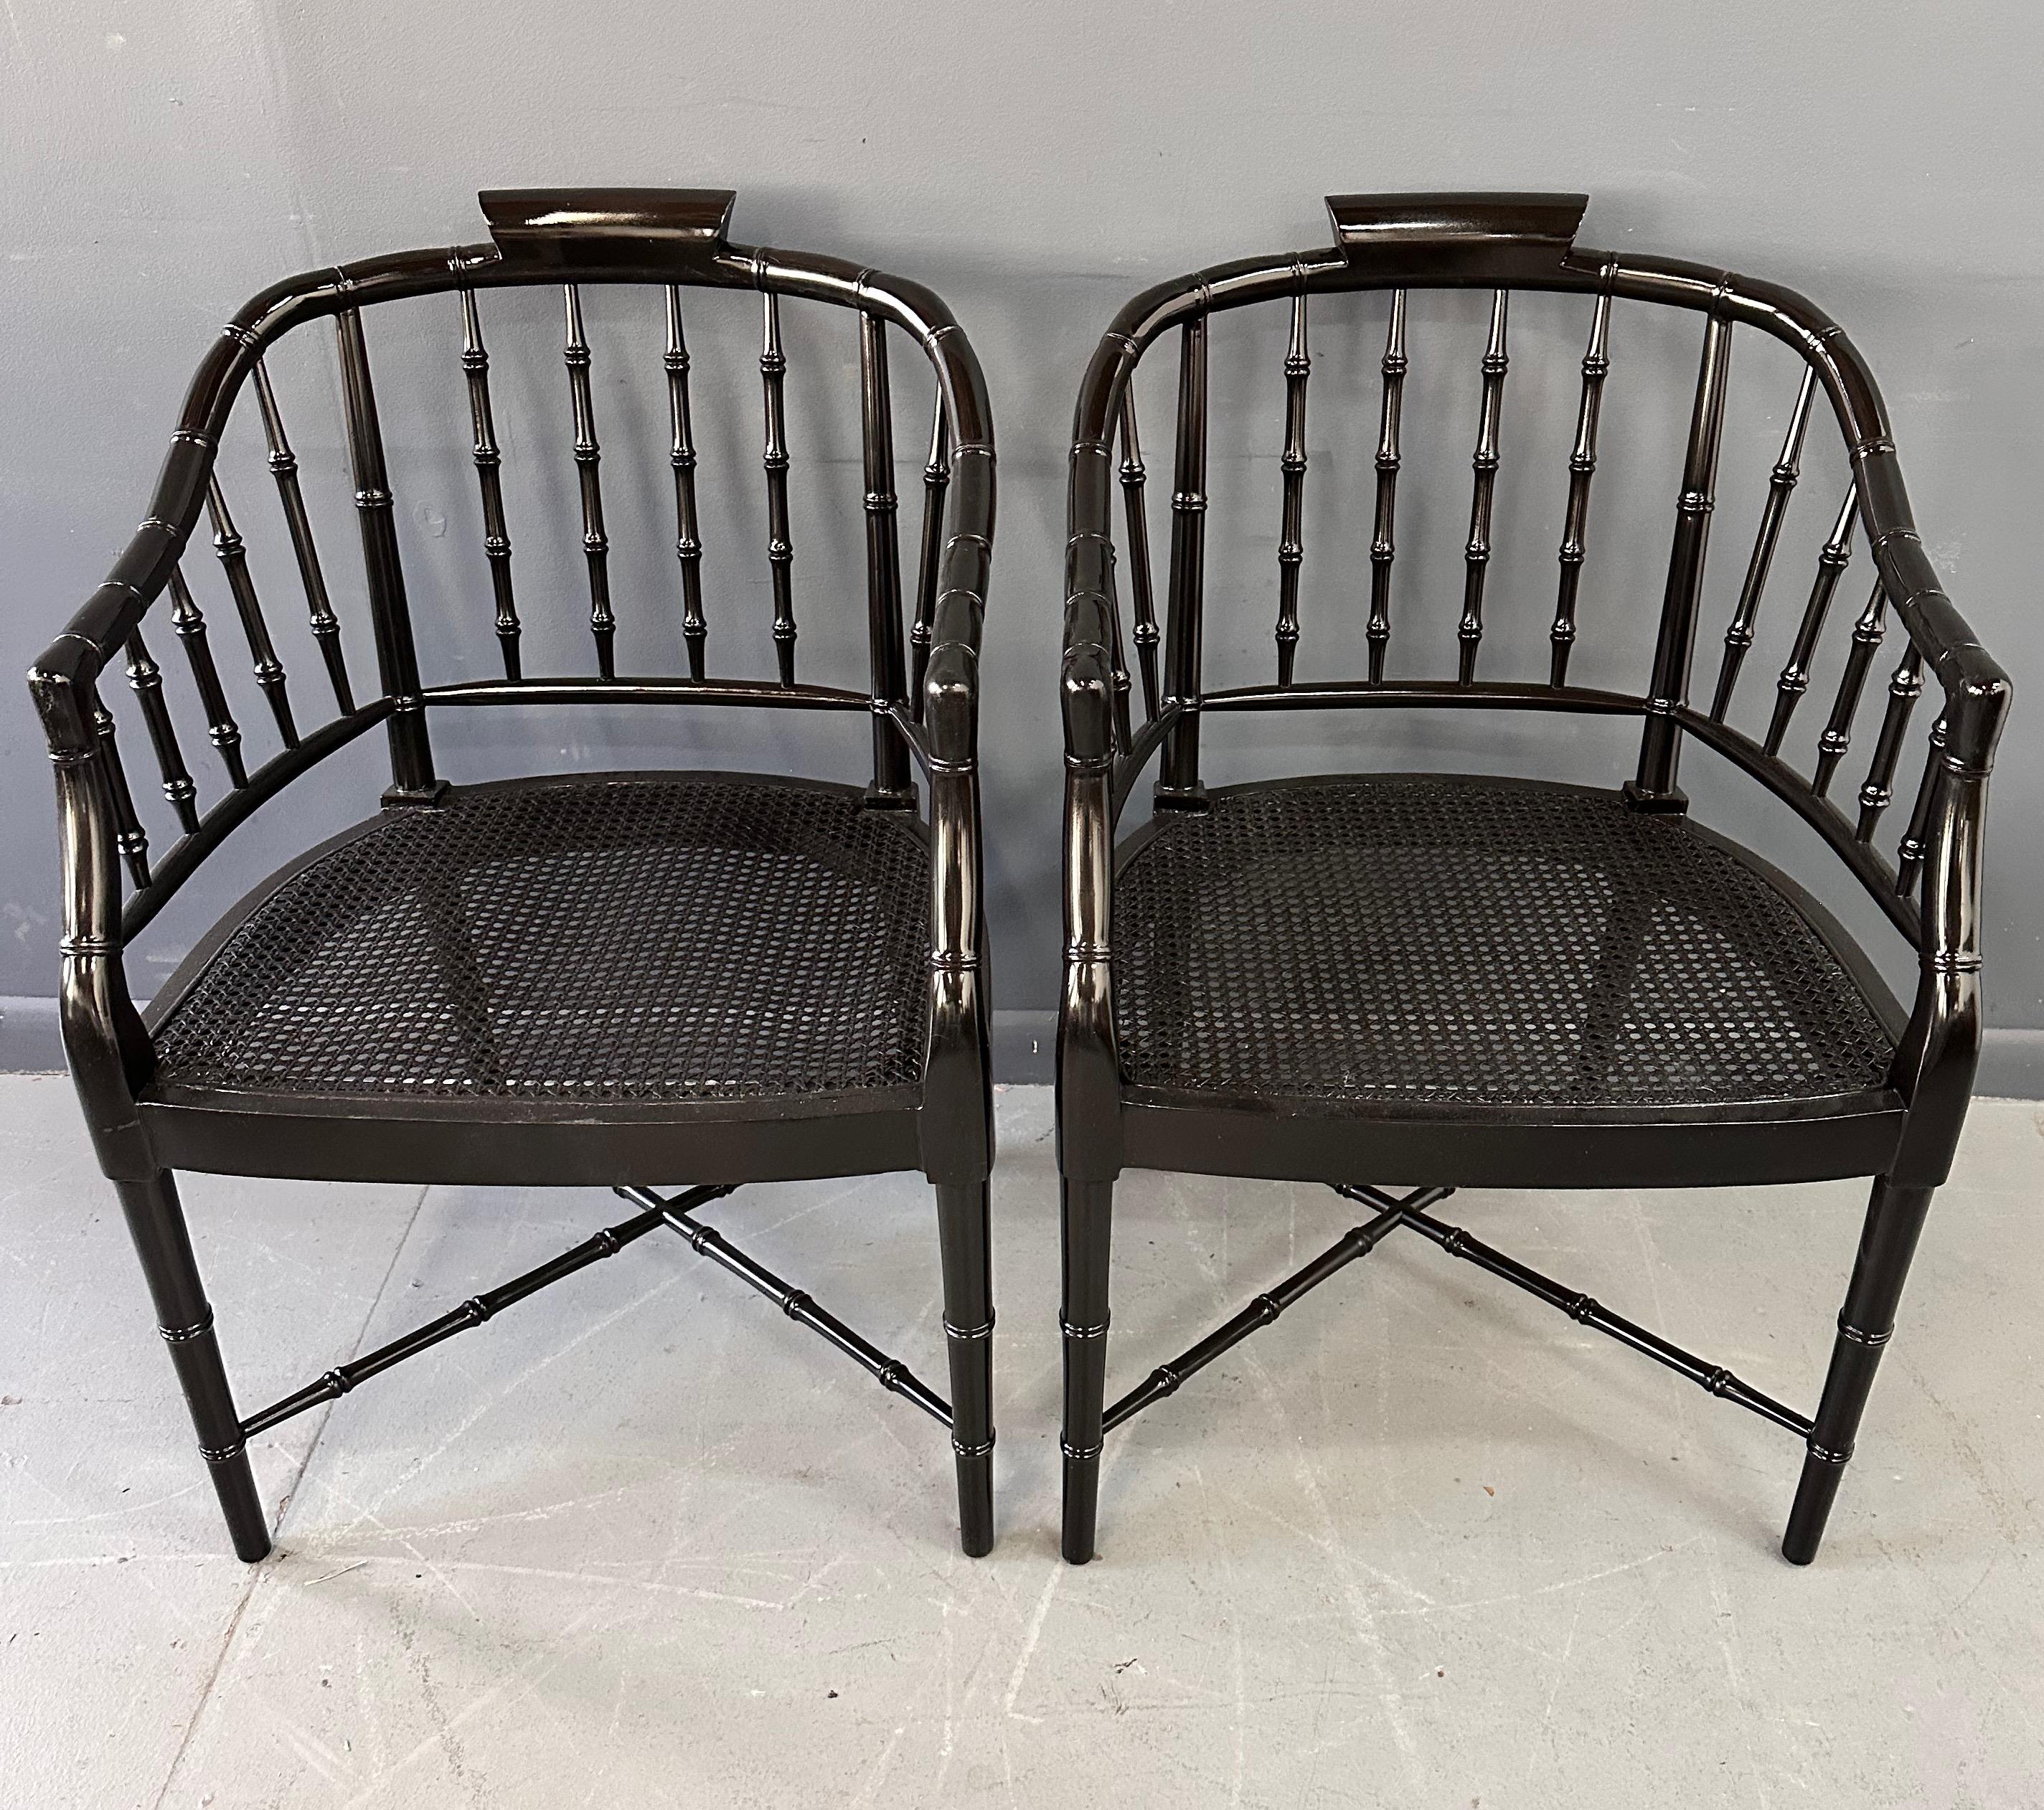 Pair of Chinoiserie Hollywood Regency Faux Bamboo Armchairs in Black by Baker In Good Condition For Sale In Philadelphia, PA